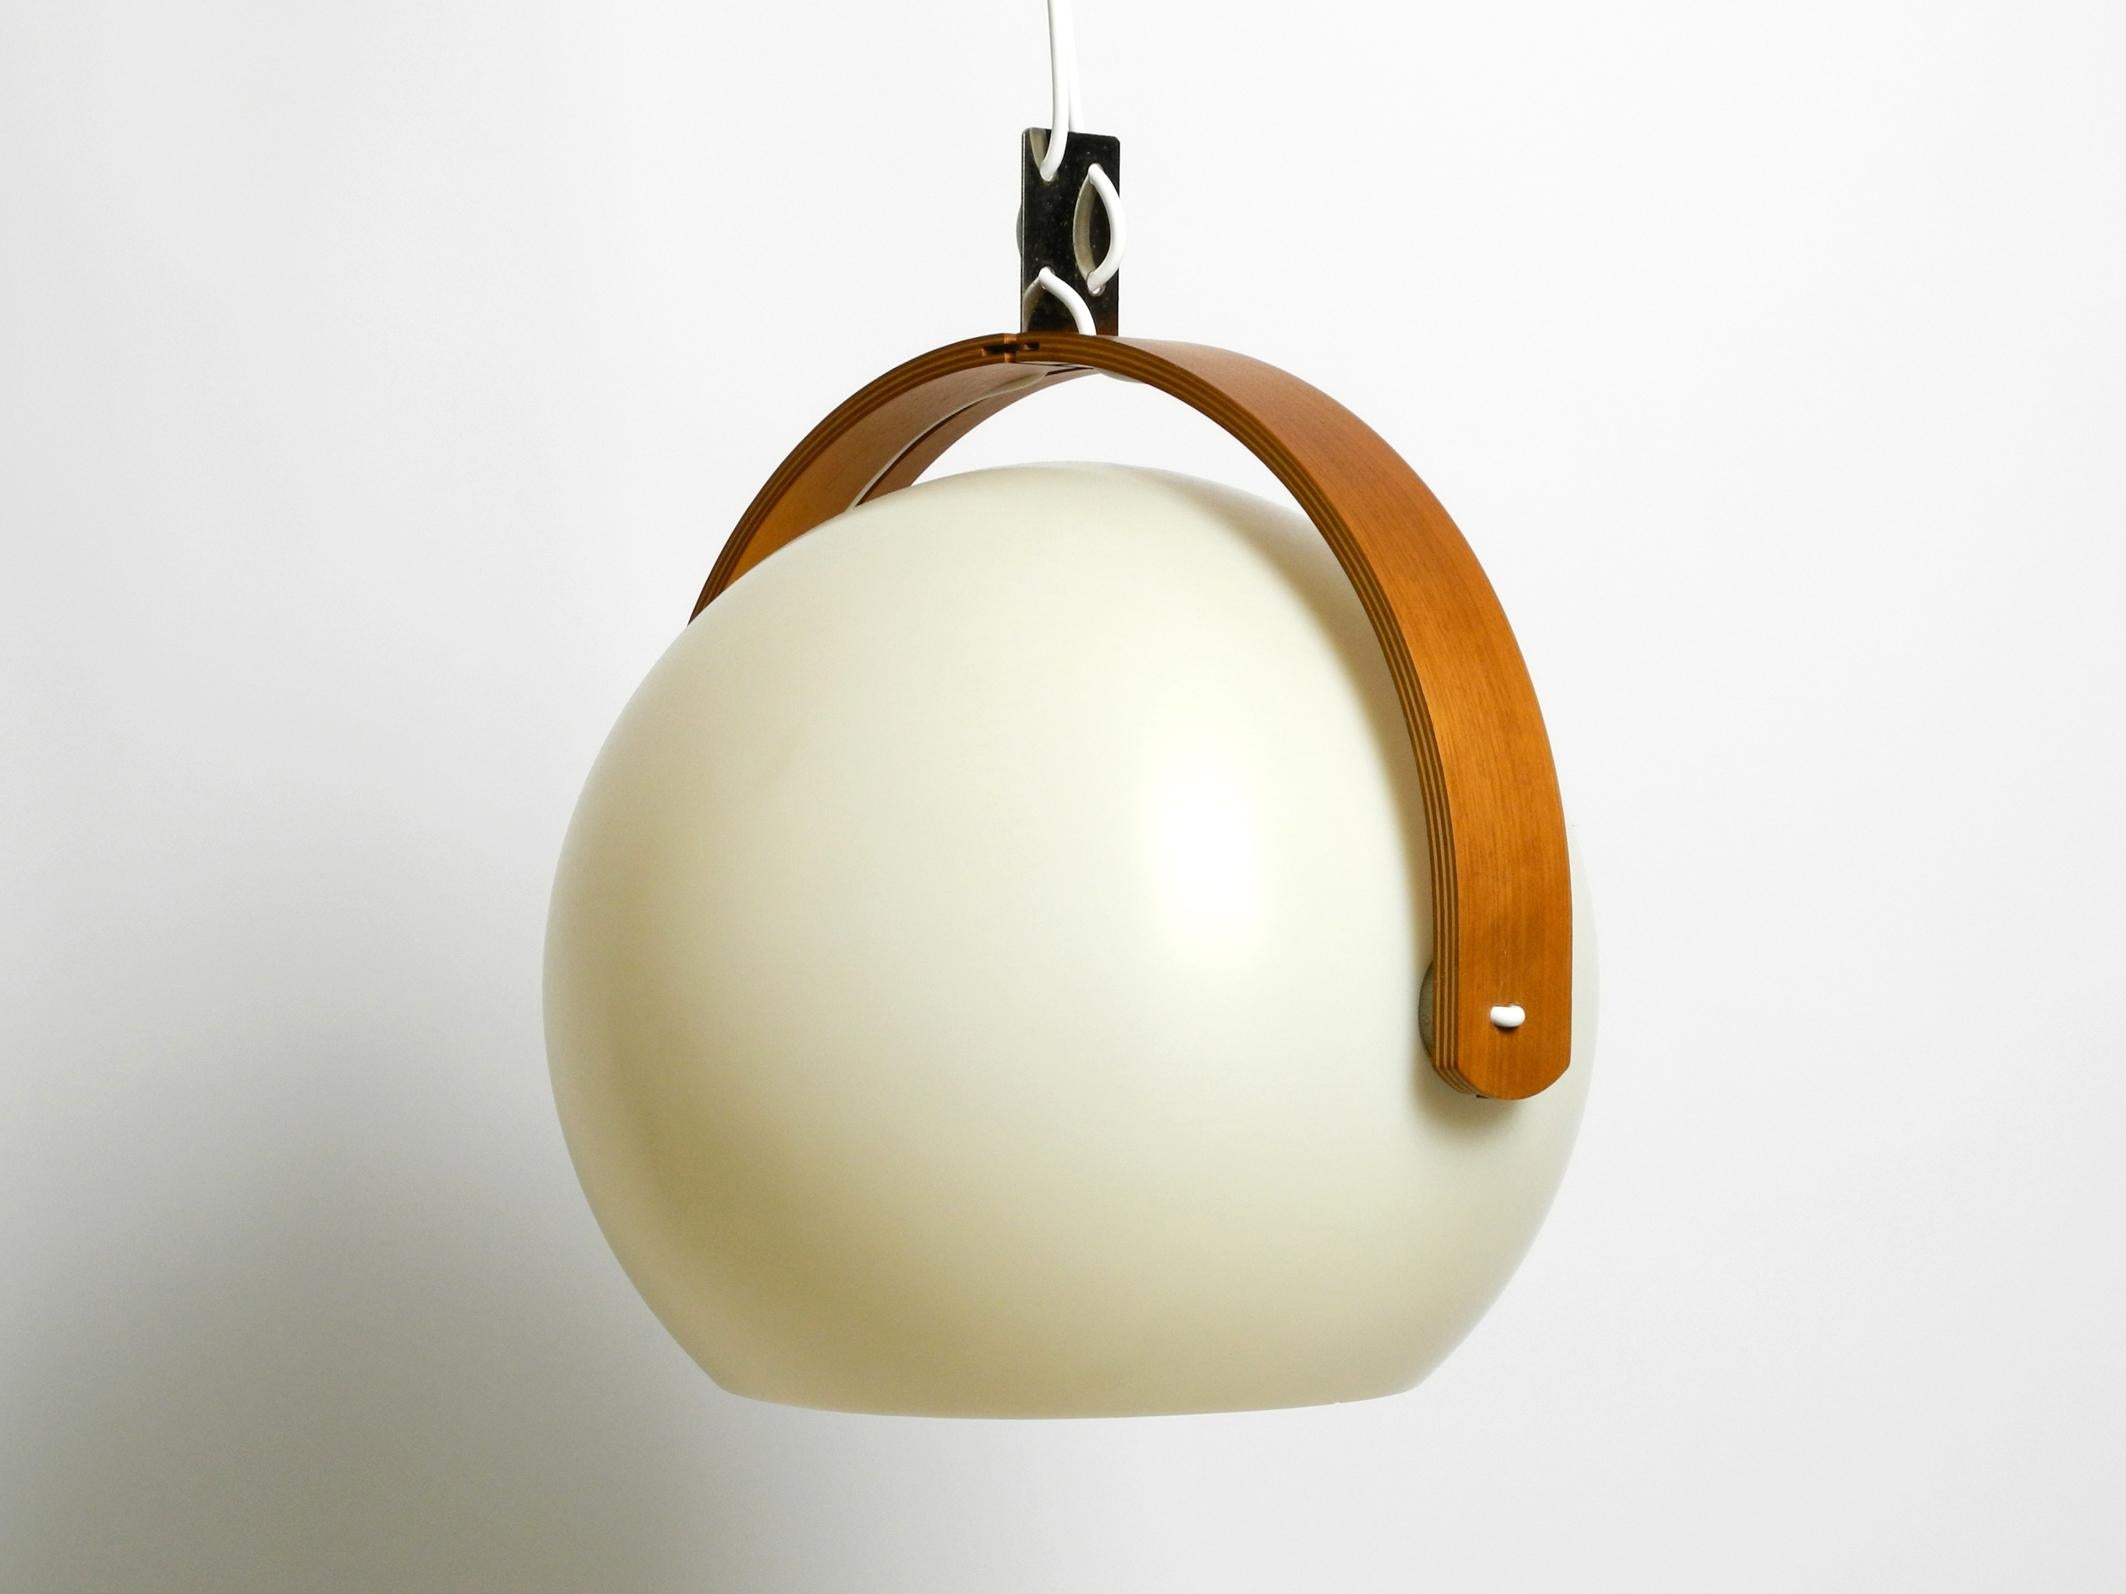 60s Temde Space Age pendant lamp with teak plywood and a sperical lampshade For Sale 6